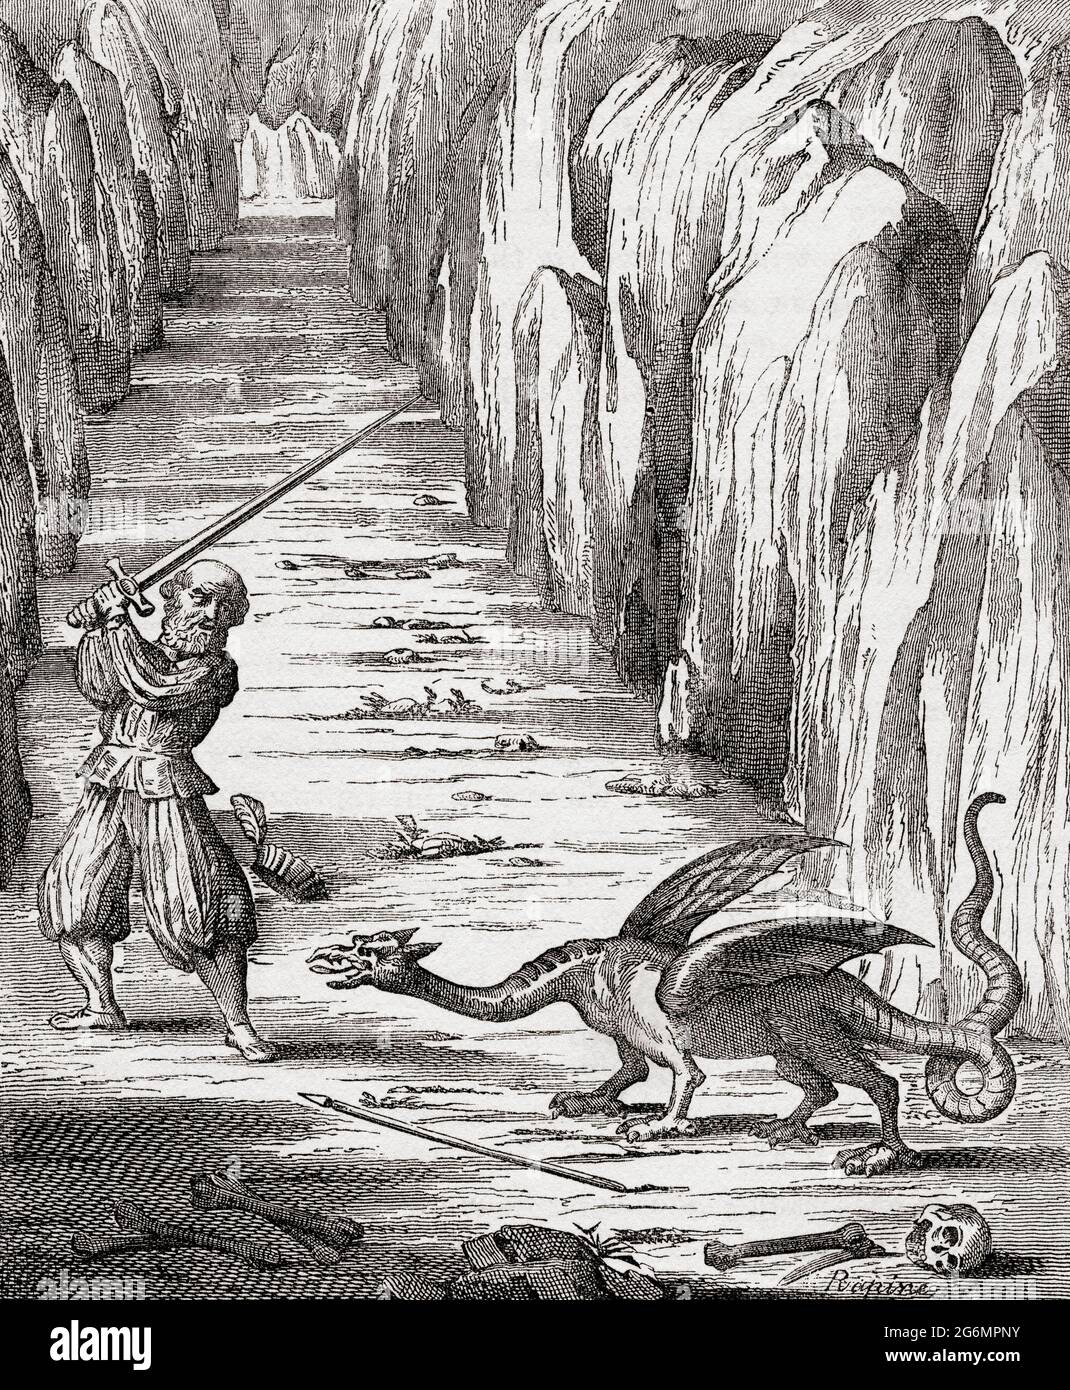 Dragon of the caverns of Mount Pilatus, Lucerne, Switzerland. A medieval legend tells of dragons with healing powers living on the mountain. After a facsimile taken from the Mundus Subterraneus of the Reverend Father Kircher.  From The Universe or, The Infinitely Great and the Infinitely Little, published 1882. Stock Photo